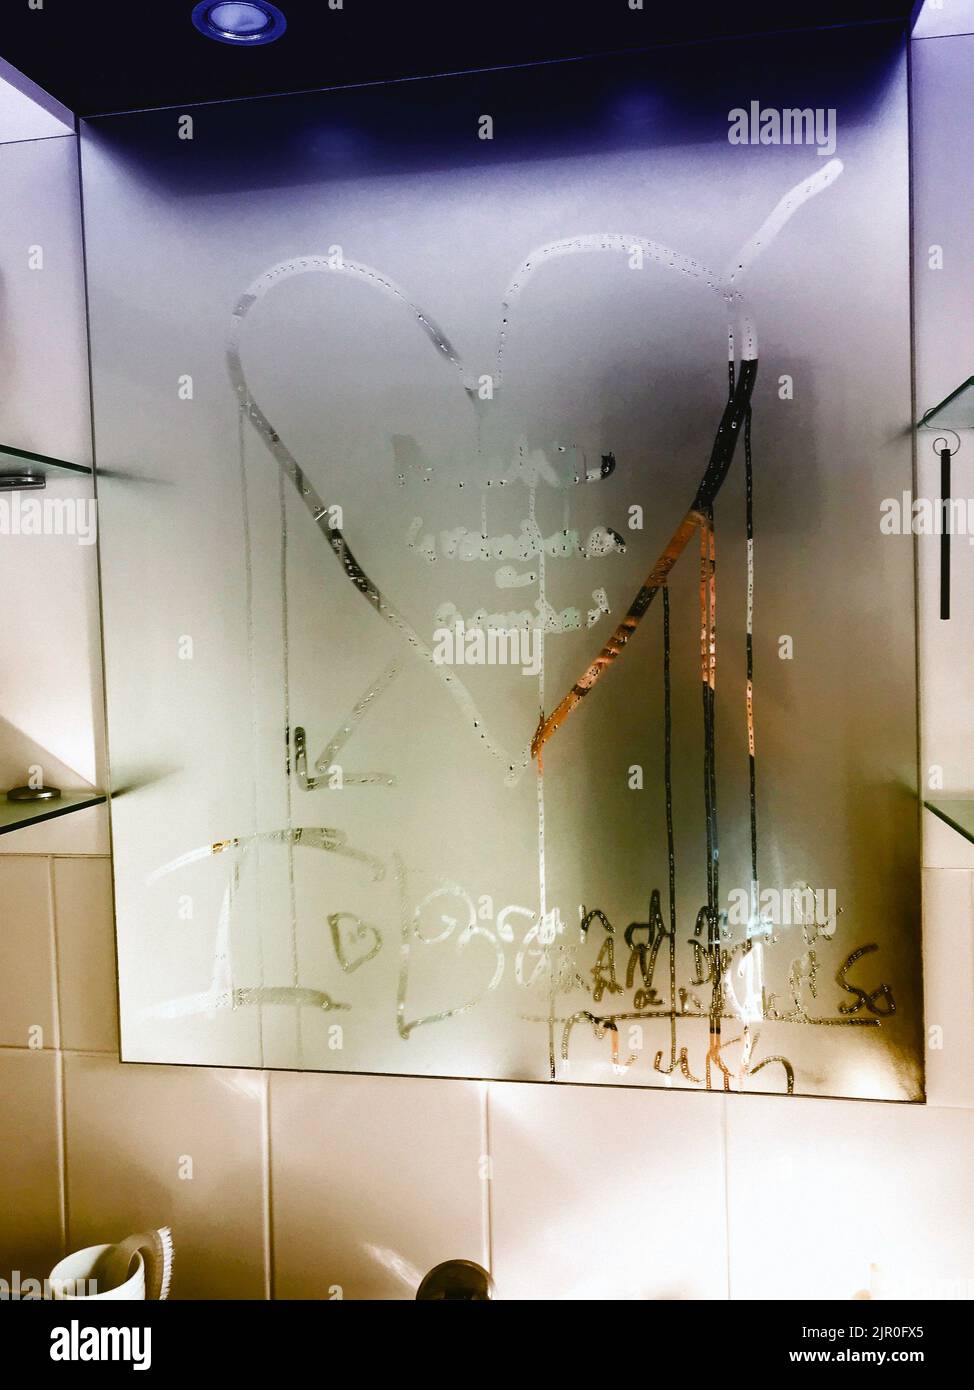 writing in steam on bathroom mirror text and heart symbol Stock Photo